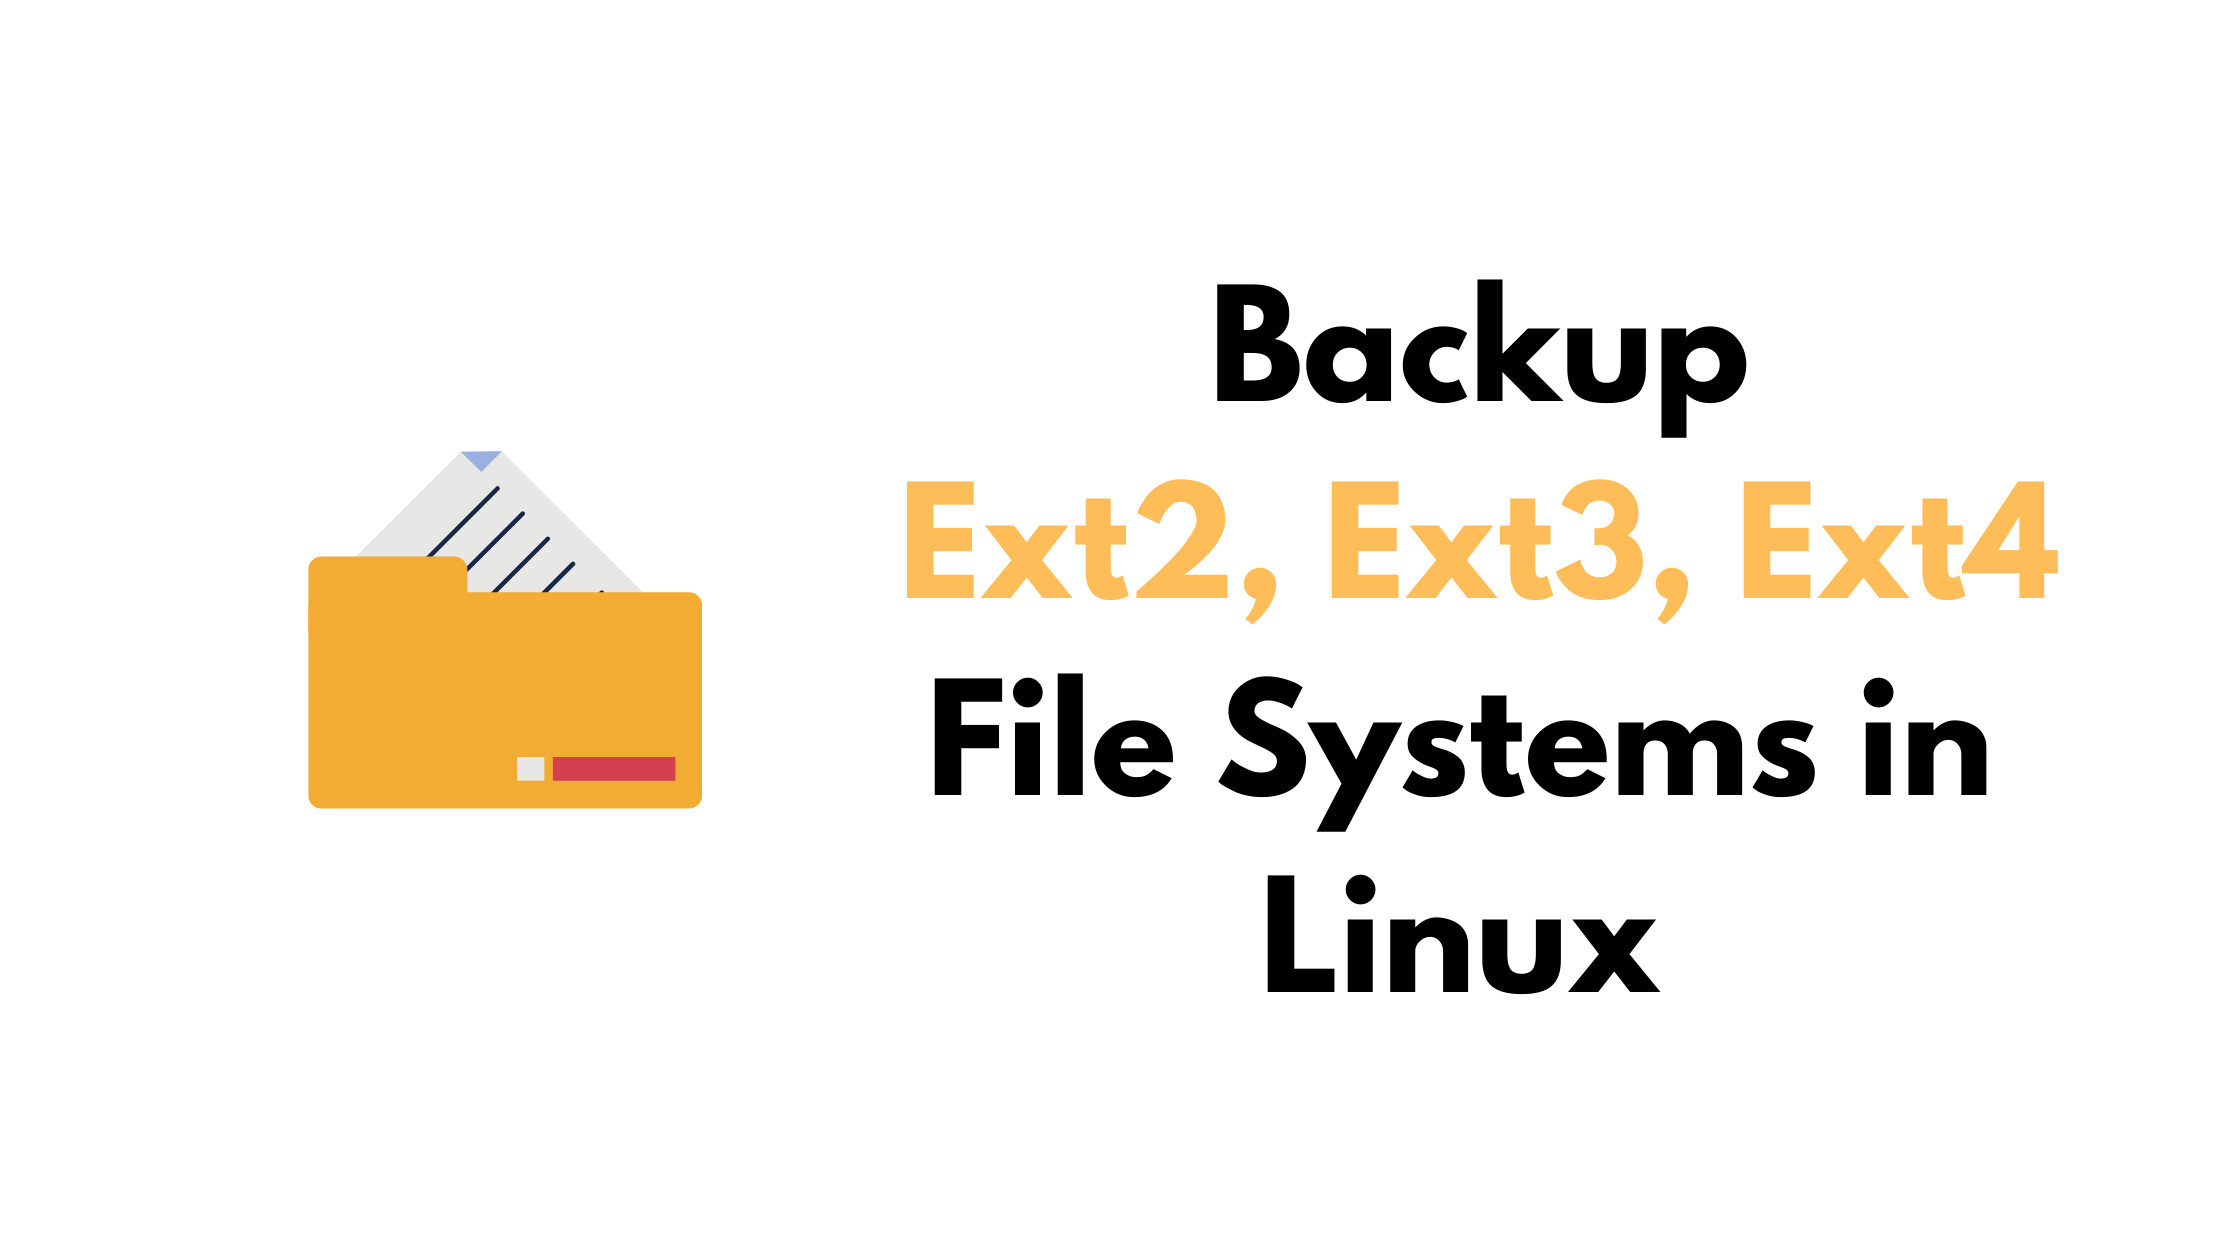 How To Backup Ext2, Ext3, or Ext4 File Systems in Linux